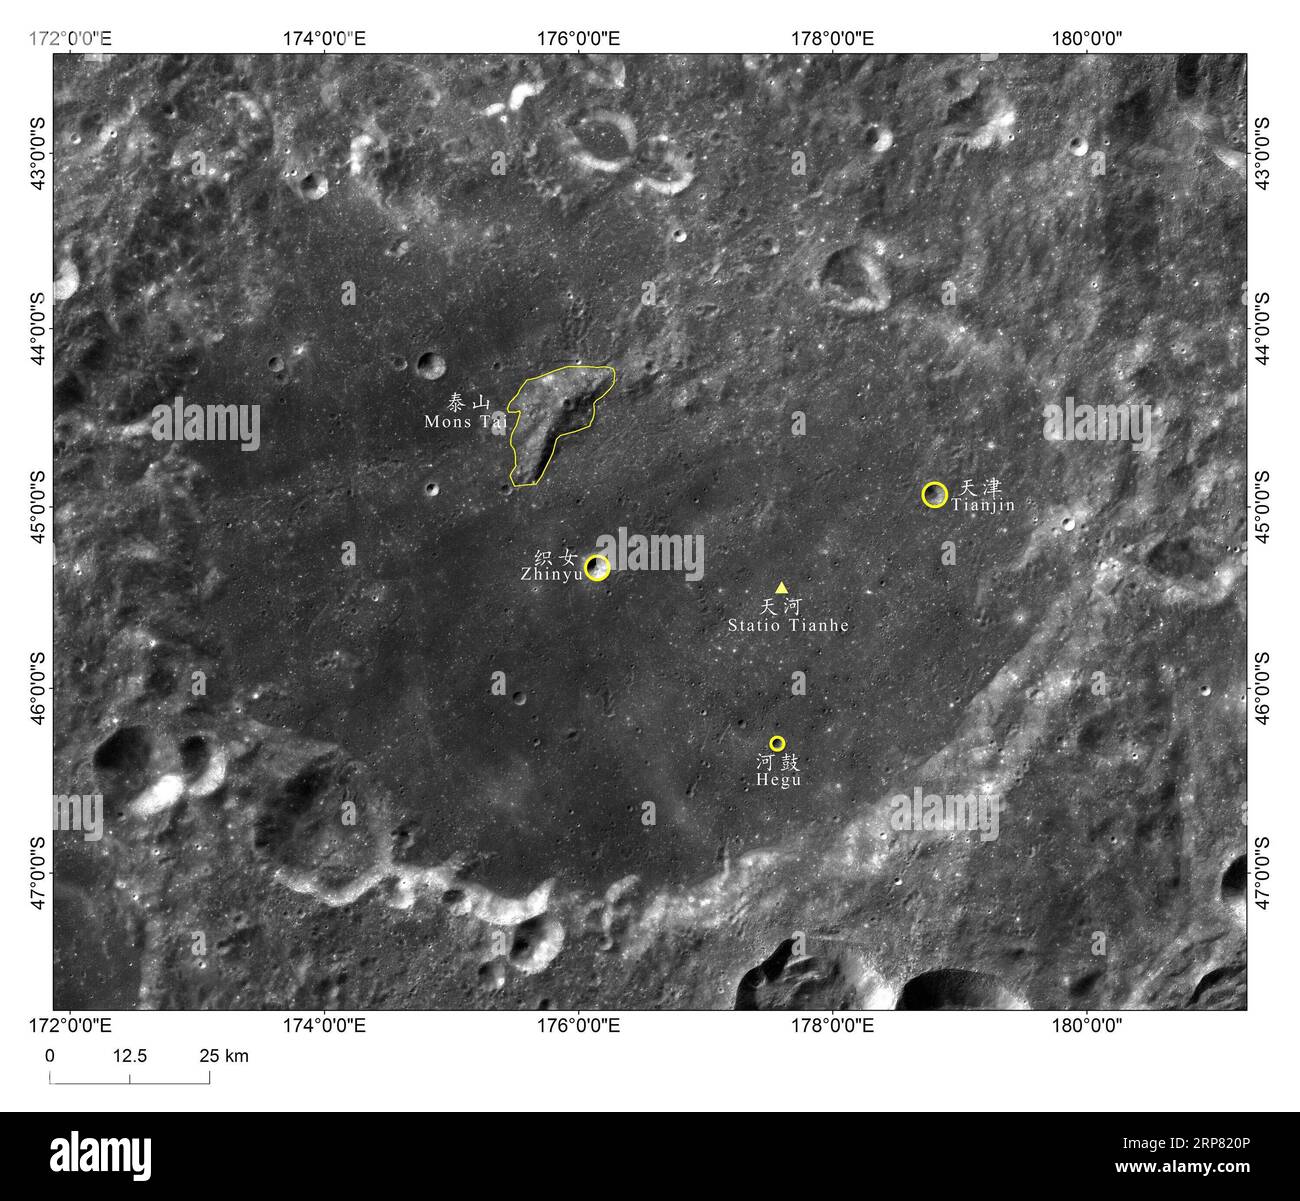 News Bilder des Tages (190215) -- BEIJING, Feb. 15, 2019 (Xinhua) -- Photo provided by the China National Space Administration (CNSA) shows the image of the landing site of China s Chang e-4 lunar probe, Statio Tianhe , surrounded by three nearby impact craters and one hill. The landing site of China s Chang e-4 lunar probe has been named Statio Tianhe after the spacecraft made the first-ever soft landing on the far side of the moon last month. Together with three nearby impact craters and one hill, the name was approved by the International Astronomical Union (IAU), Liu Jizhong, director of t Stock Photo